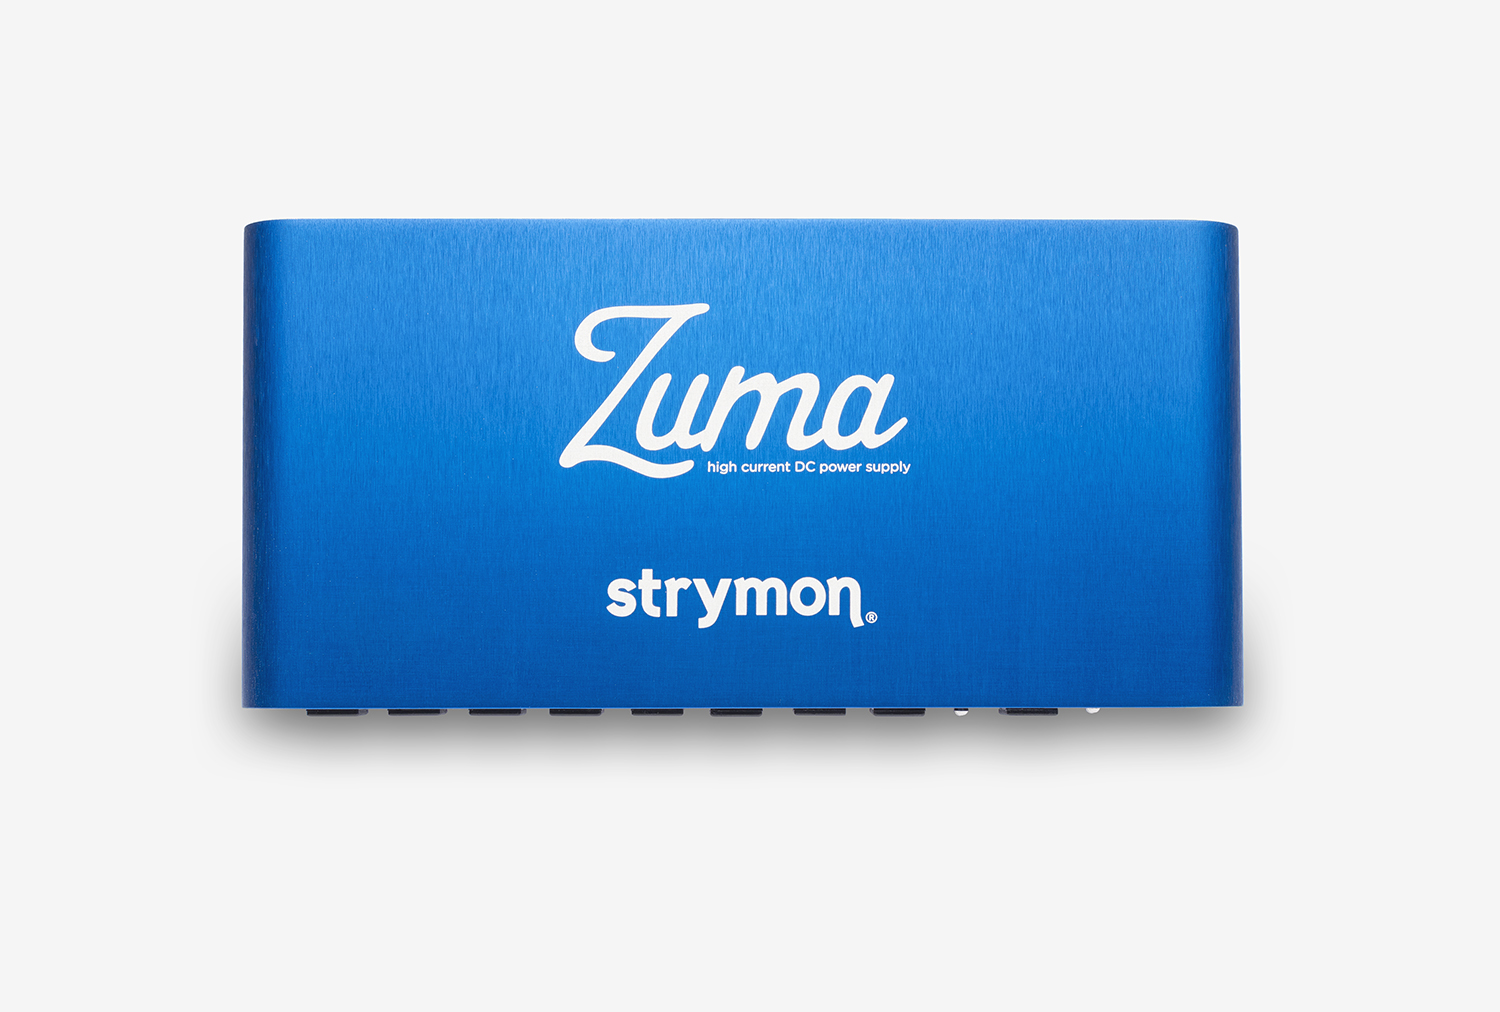 Zuma product top down view on light background